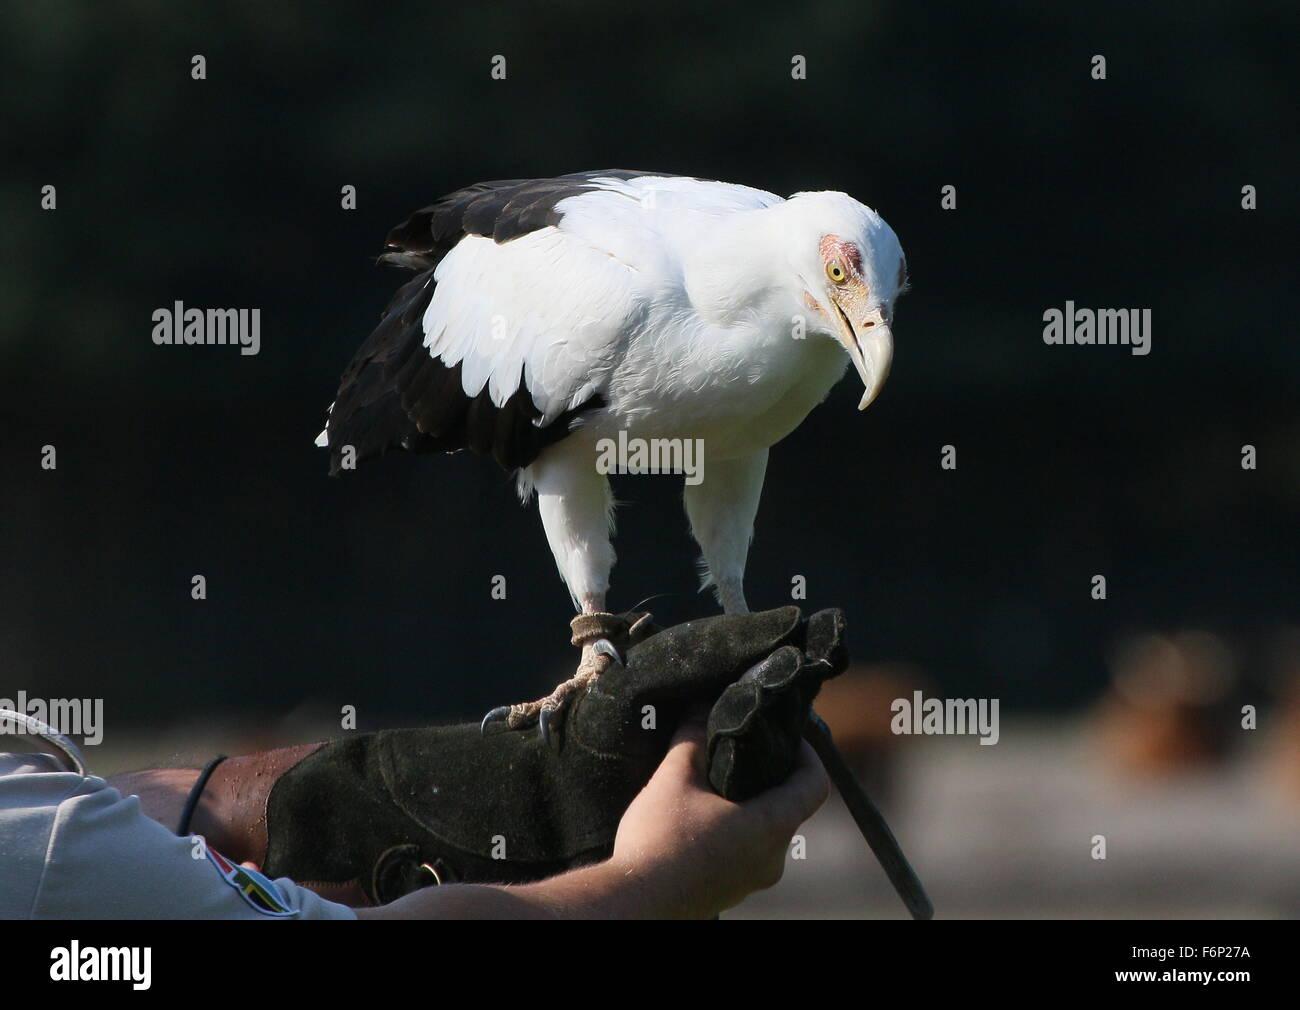 African Palm nut vulture (Gypohierax angolensis). Falconer with glove during bird of prey show at Beekse Bergen Zoo, Netherlands Stock Photo